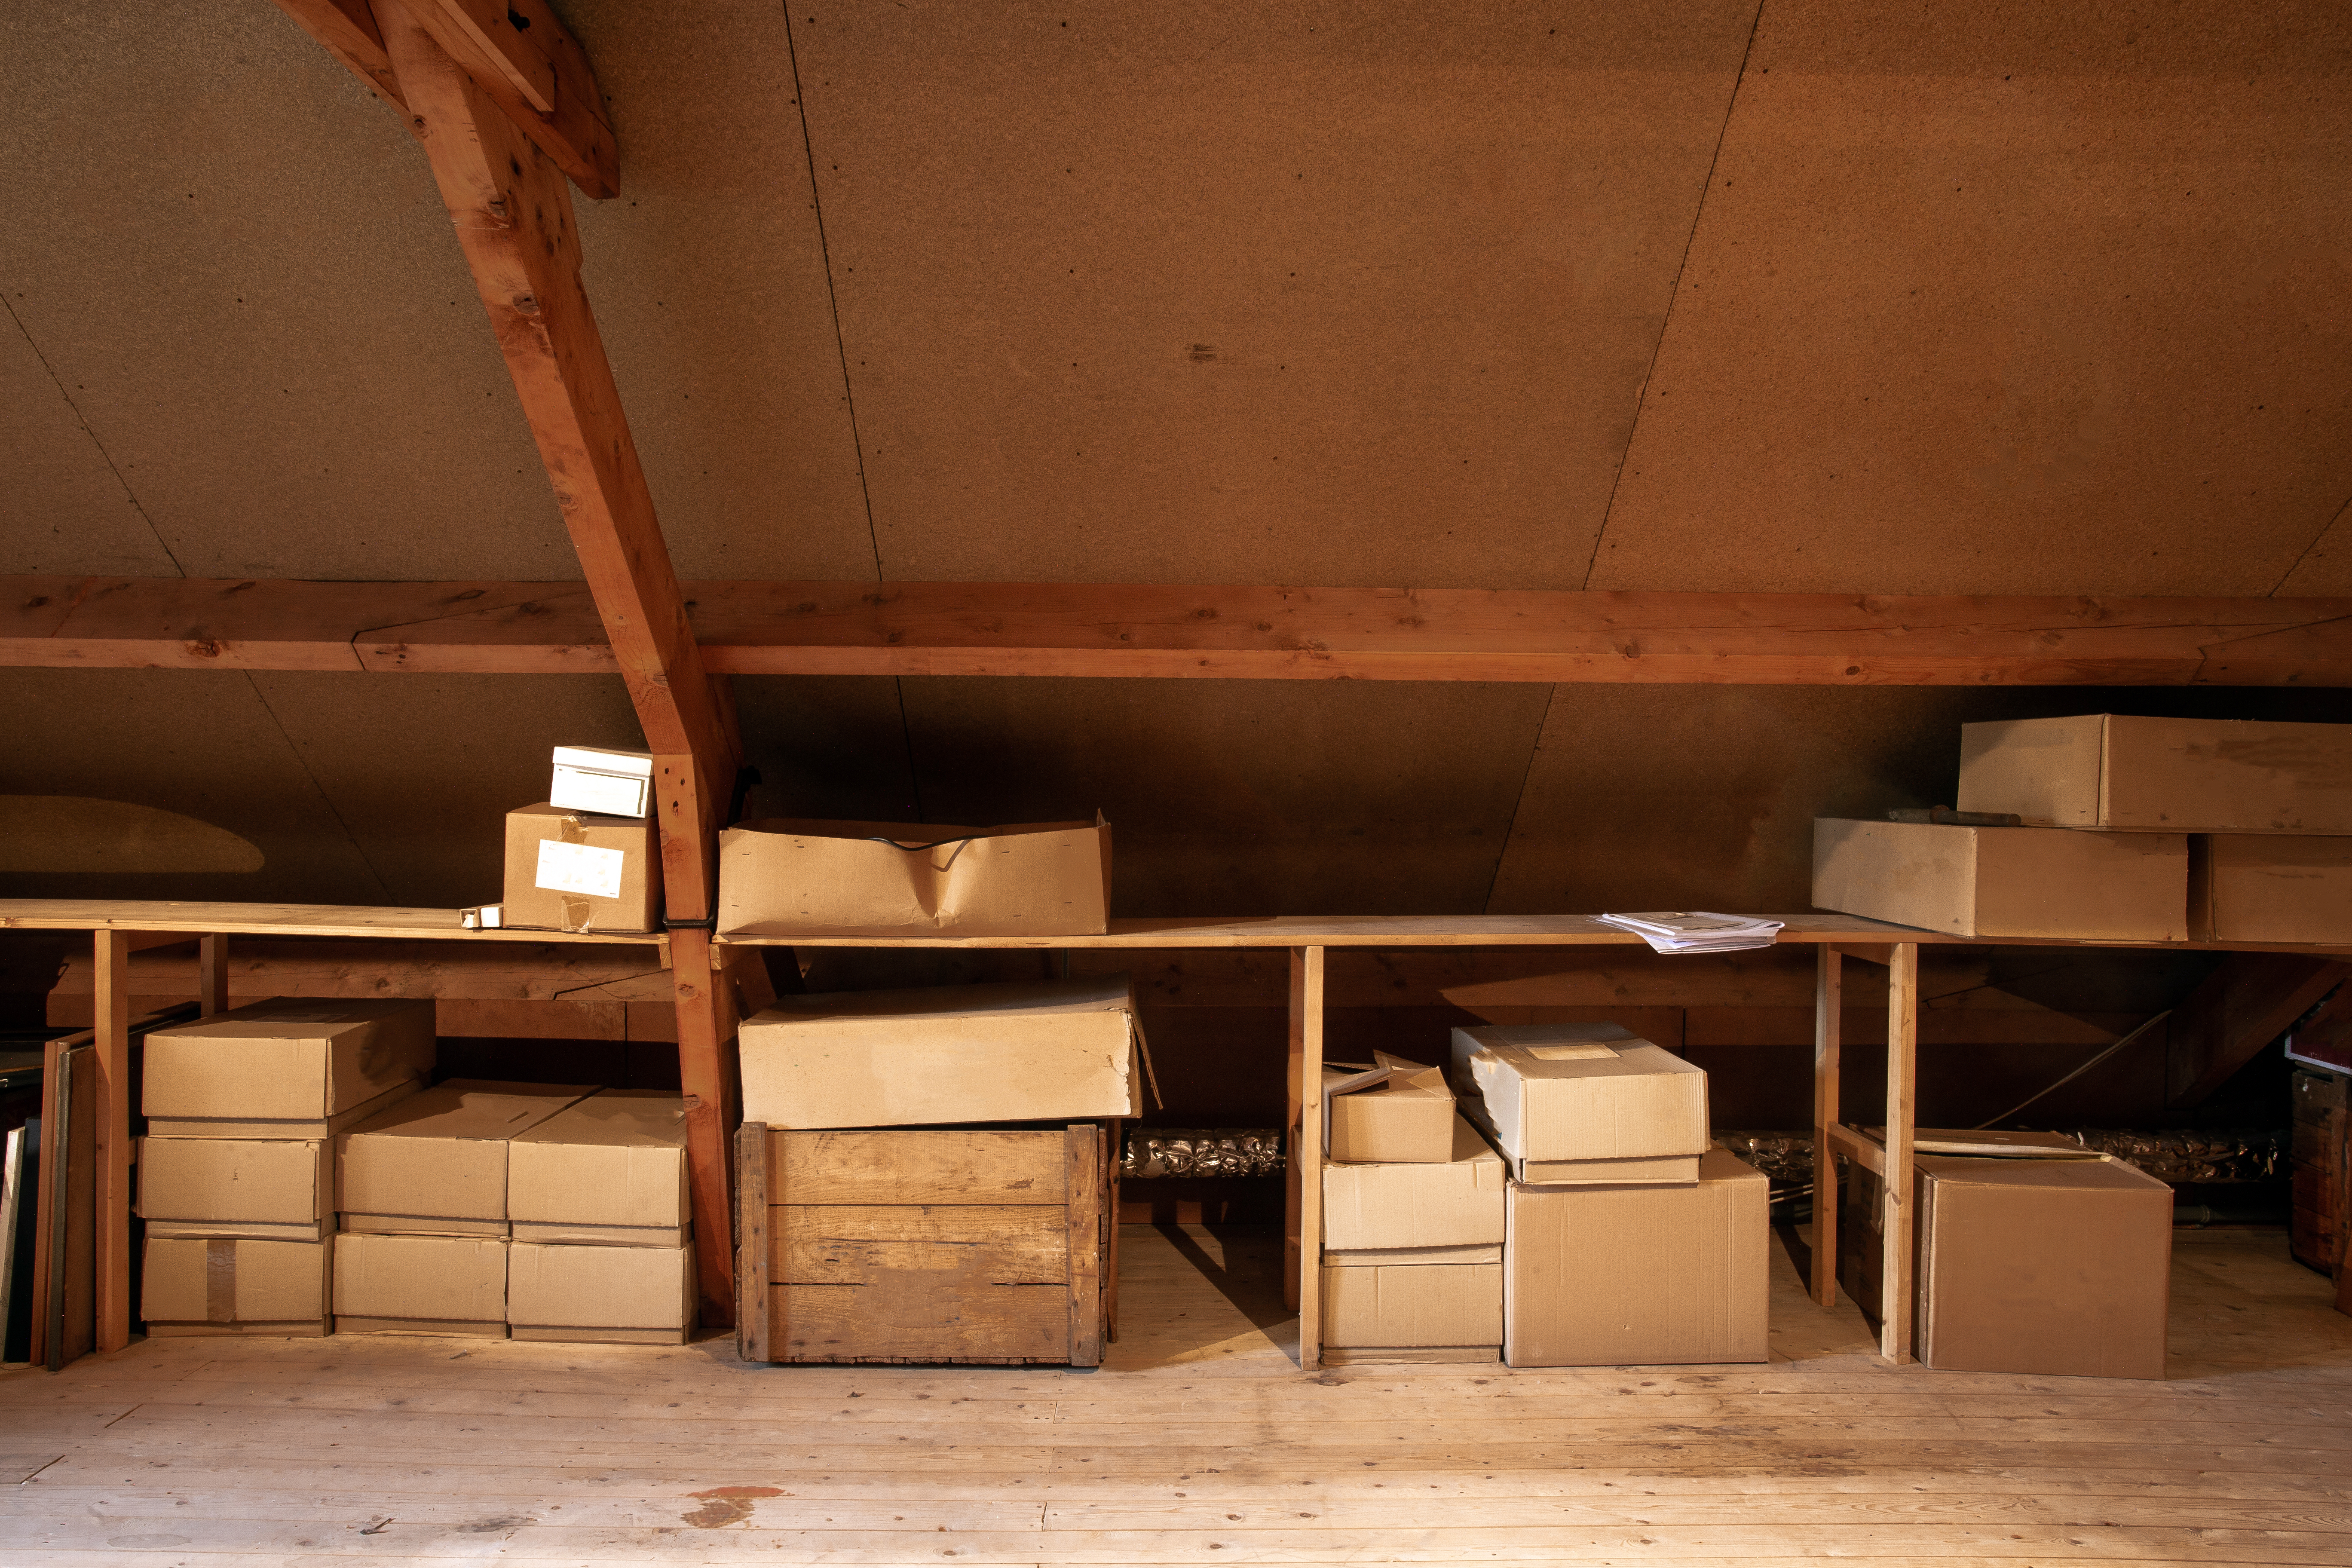 An old wooden attic interior with old cardboard boxes for storage | Source: Shutterstock